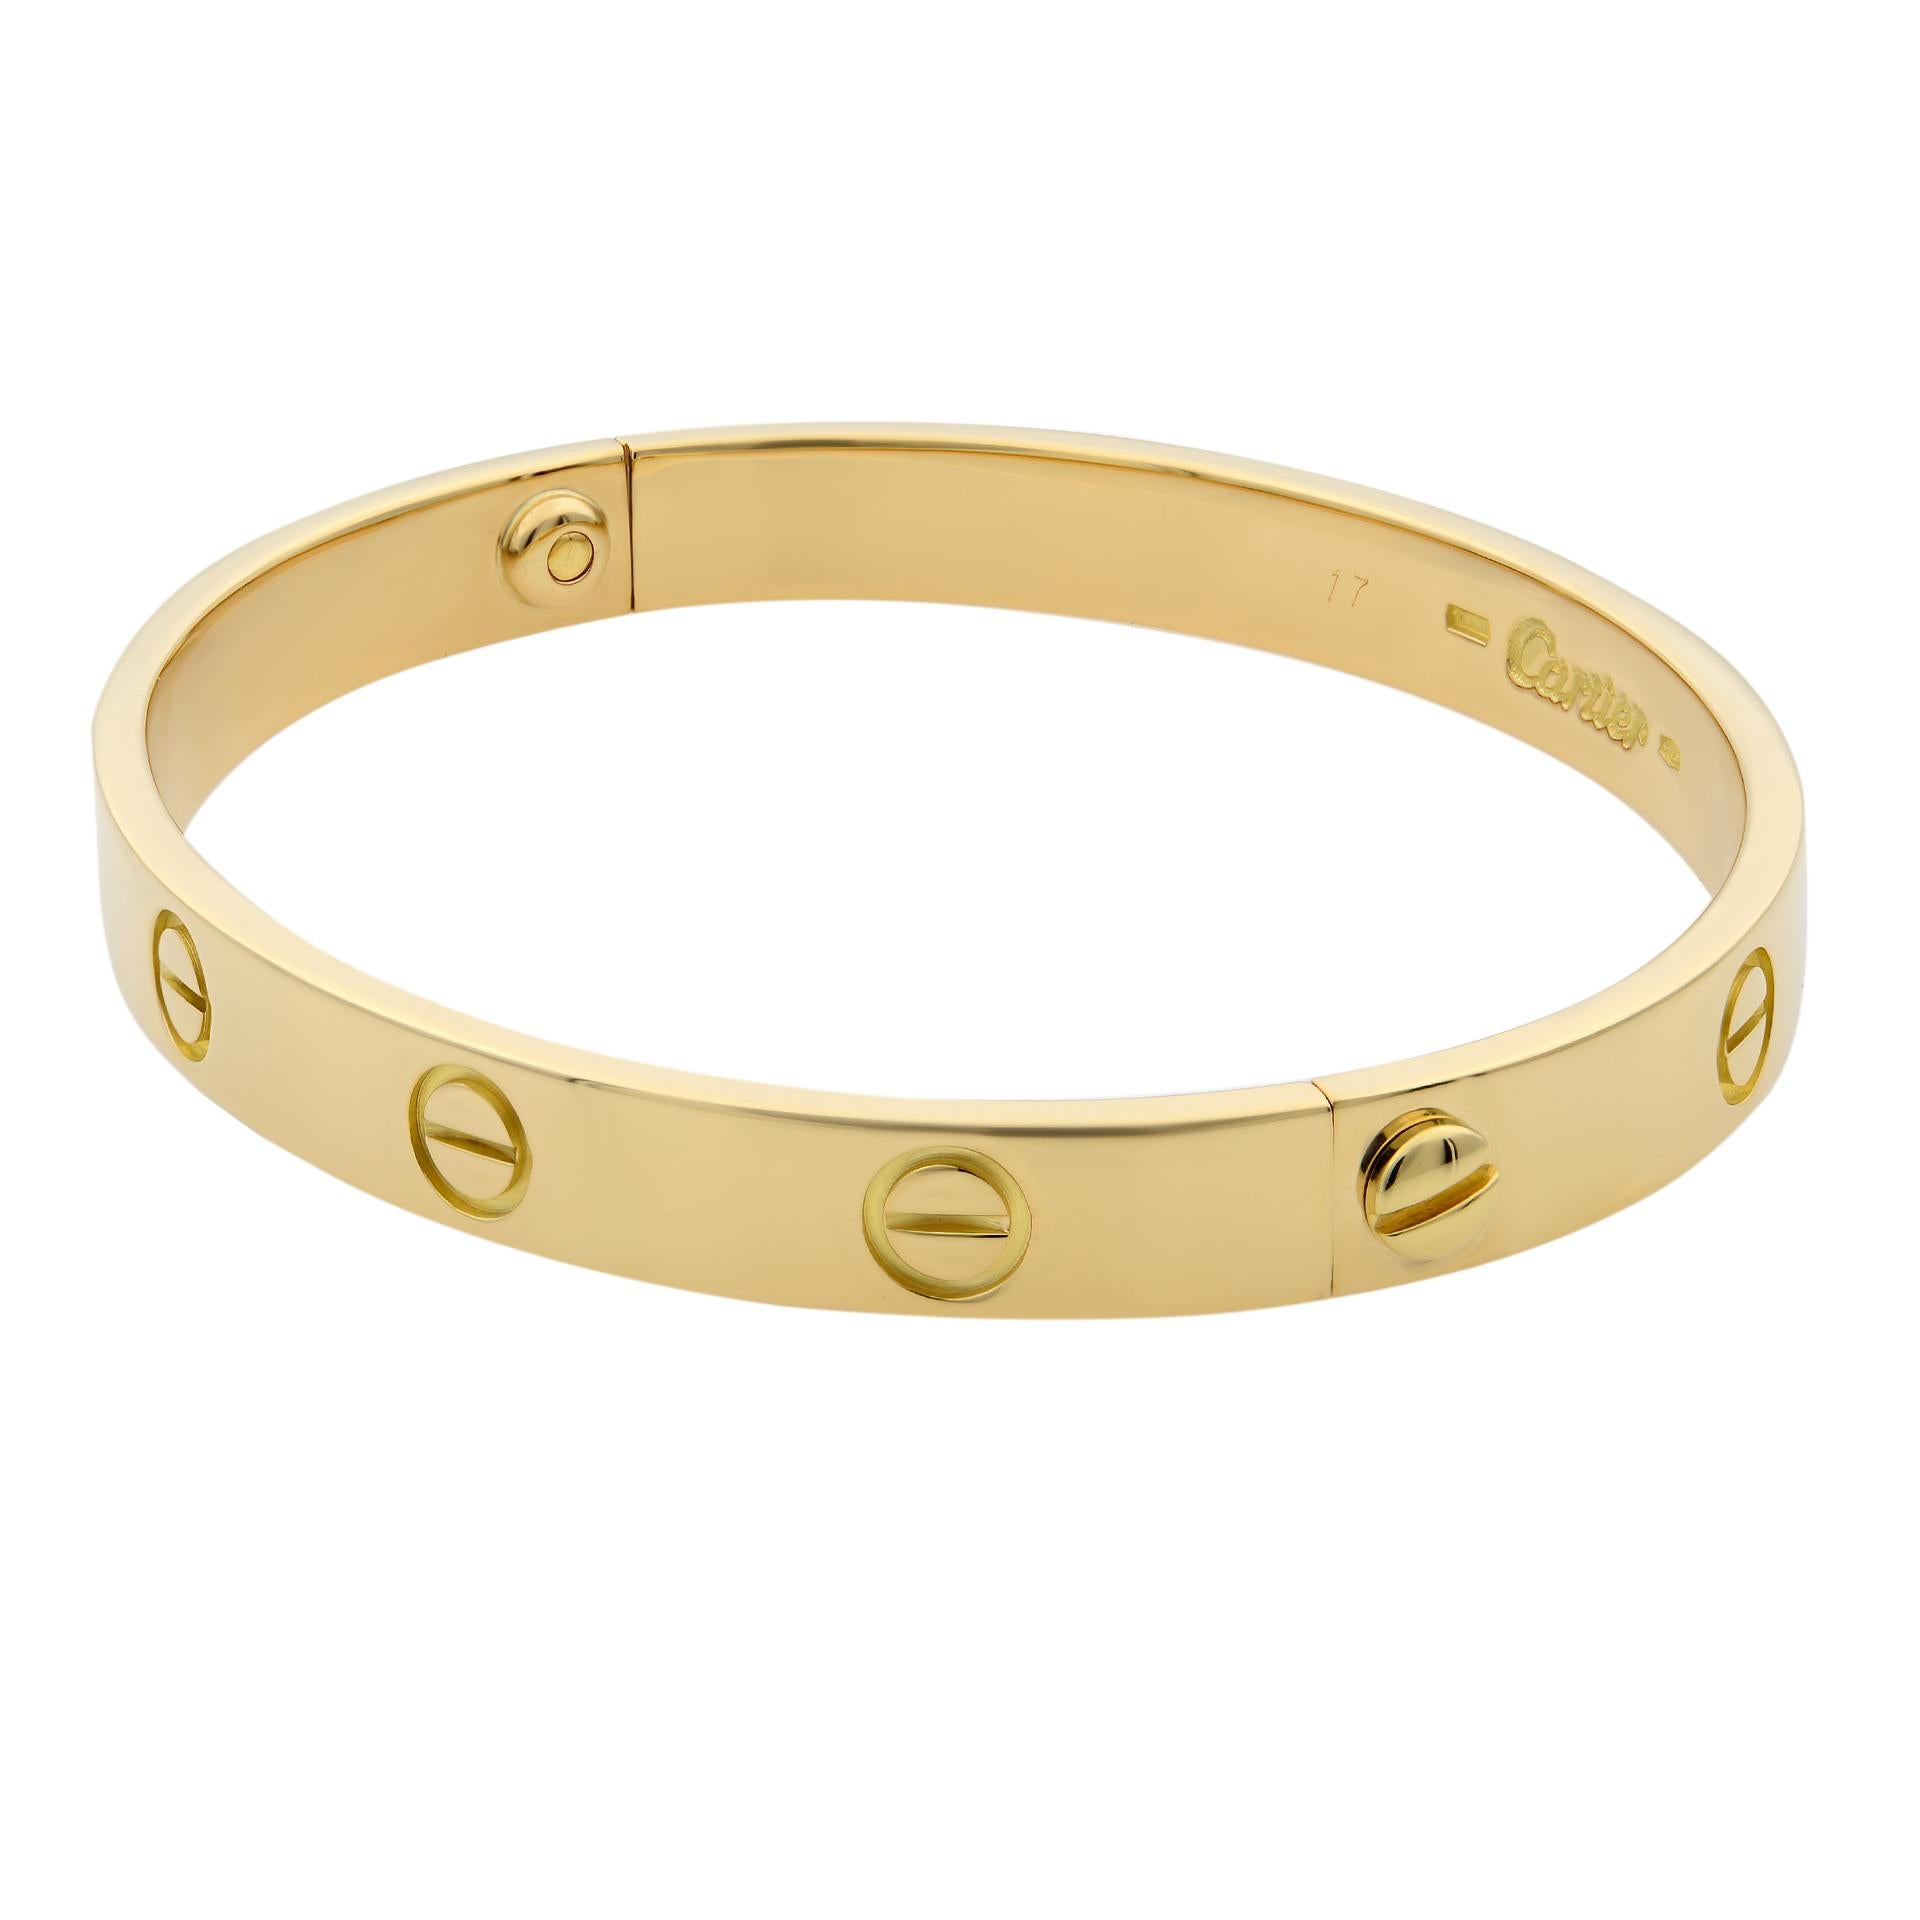 Cartier Love bracelet, 18K yellow gold. Old screw system. Width: 6.1mm. Size 17.
Condition: pre-owned, looks great. Comes with a screw driver. Box and papers are not included.